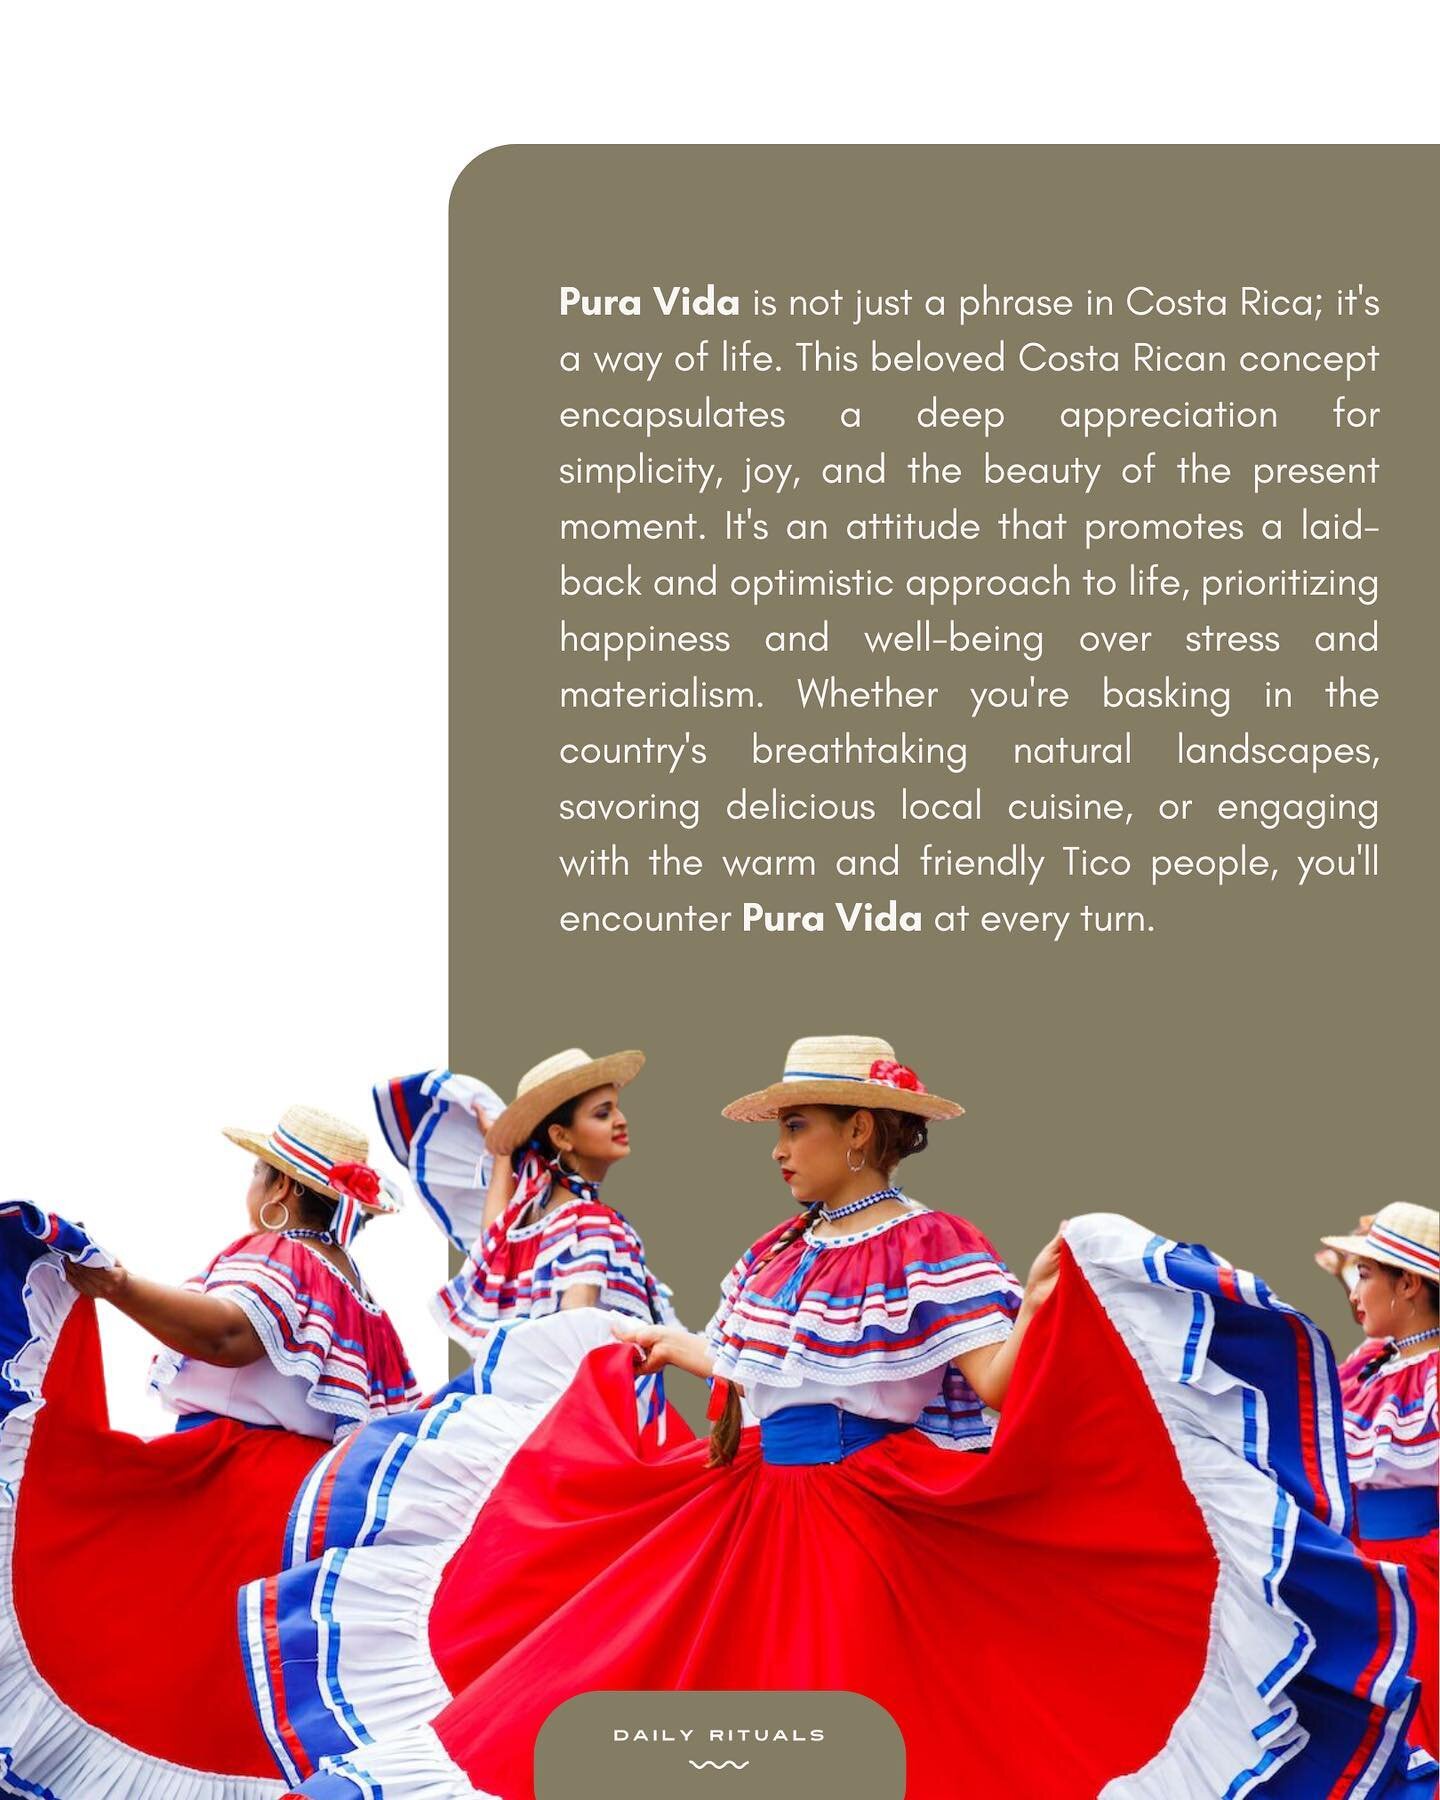 Pura Vida is not just a phrase in Costa Rica; it's a way of life. This beloved Costa Rican concept encapsulates a deep appreciation for simplicity, joy, and the beauty of the present moment. It's an attitude that promotes a laid-back and optimistic a